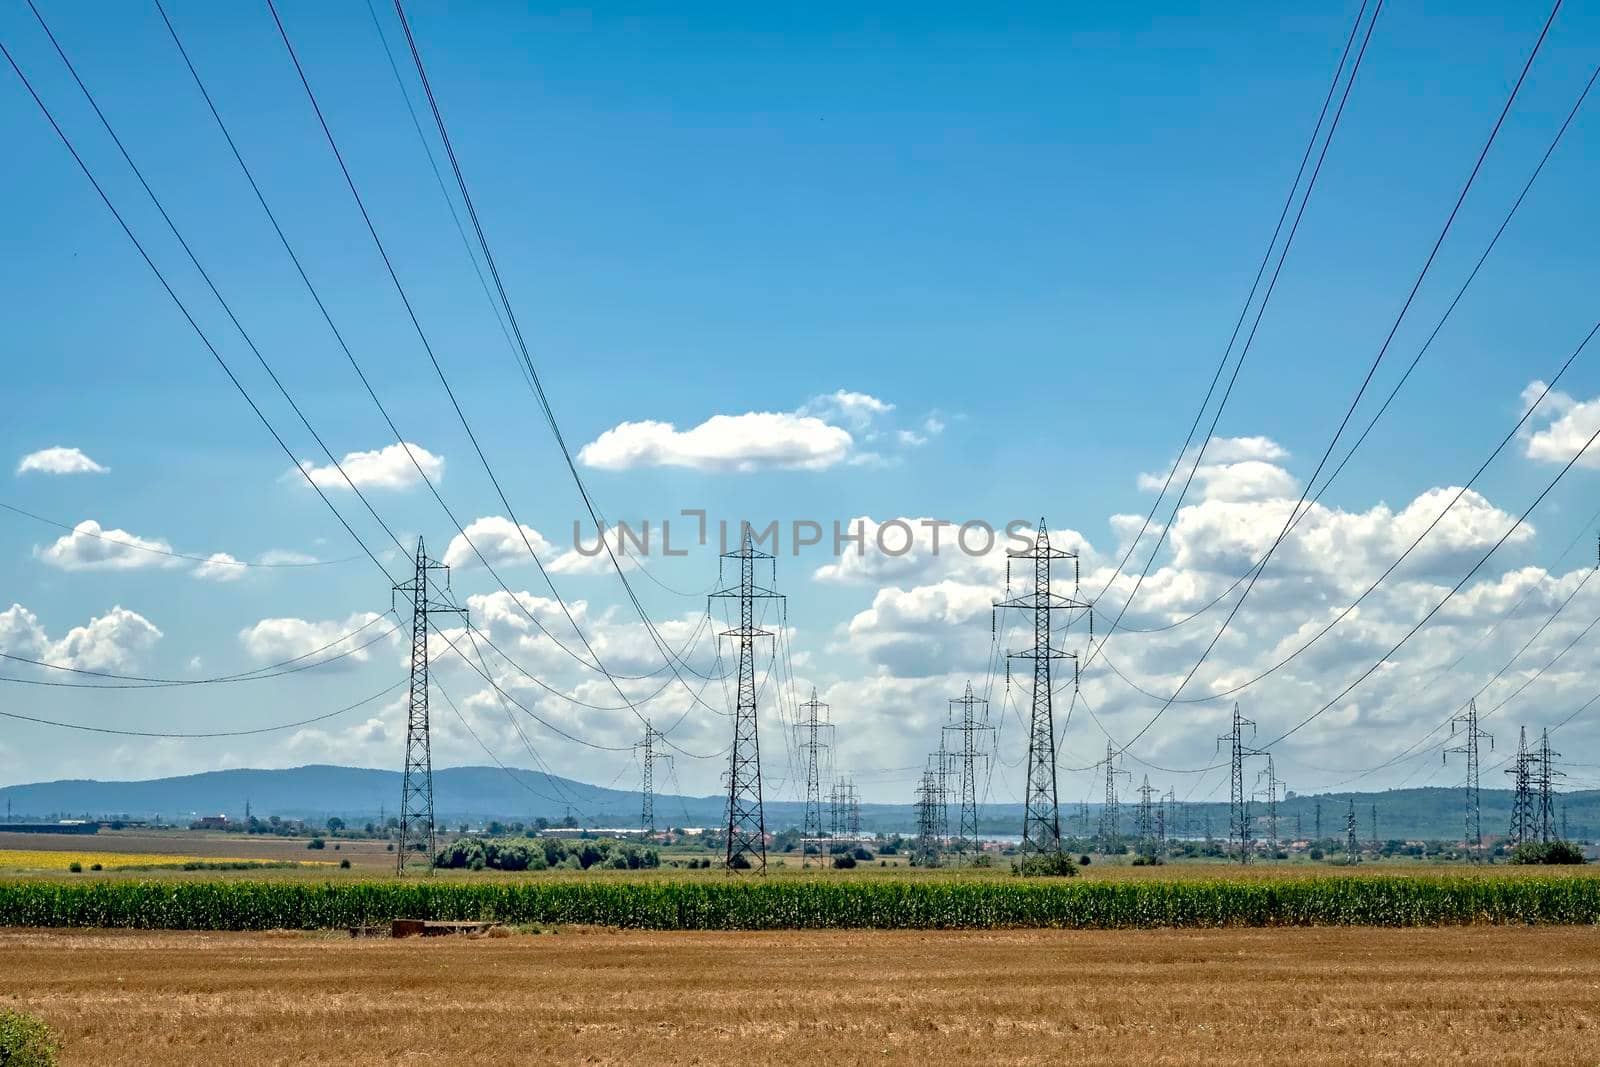 Rows of electrical towers and power lines. Horizontal view